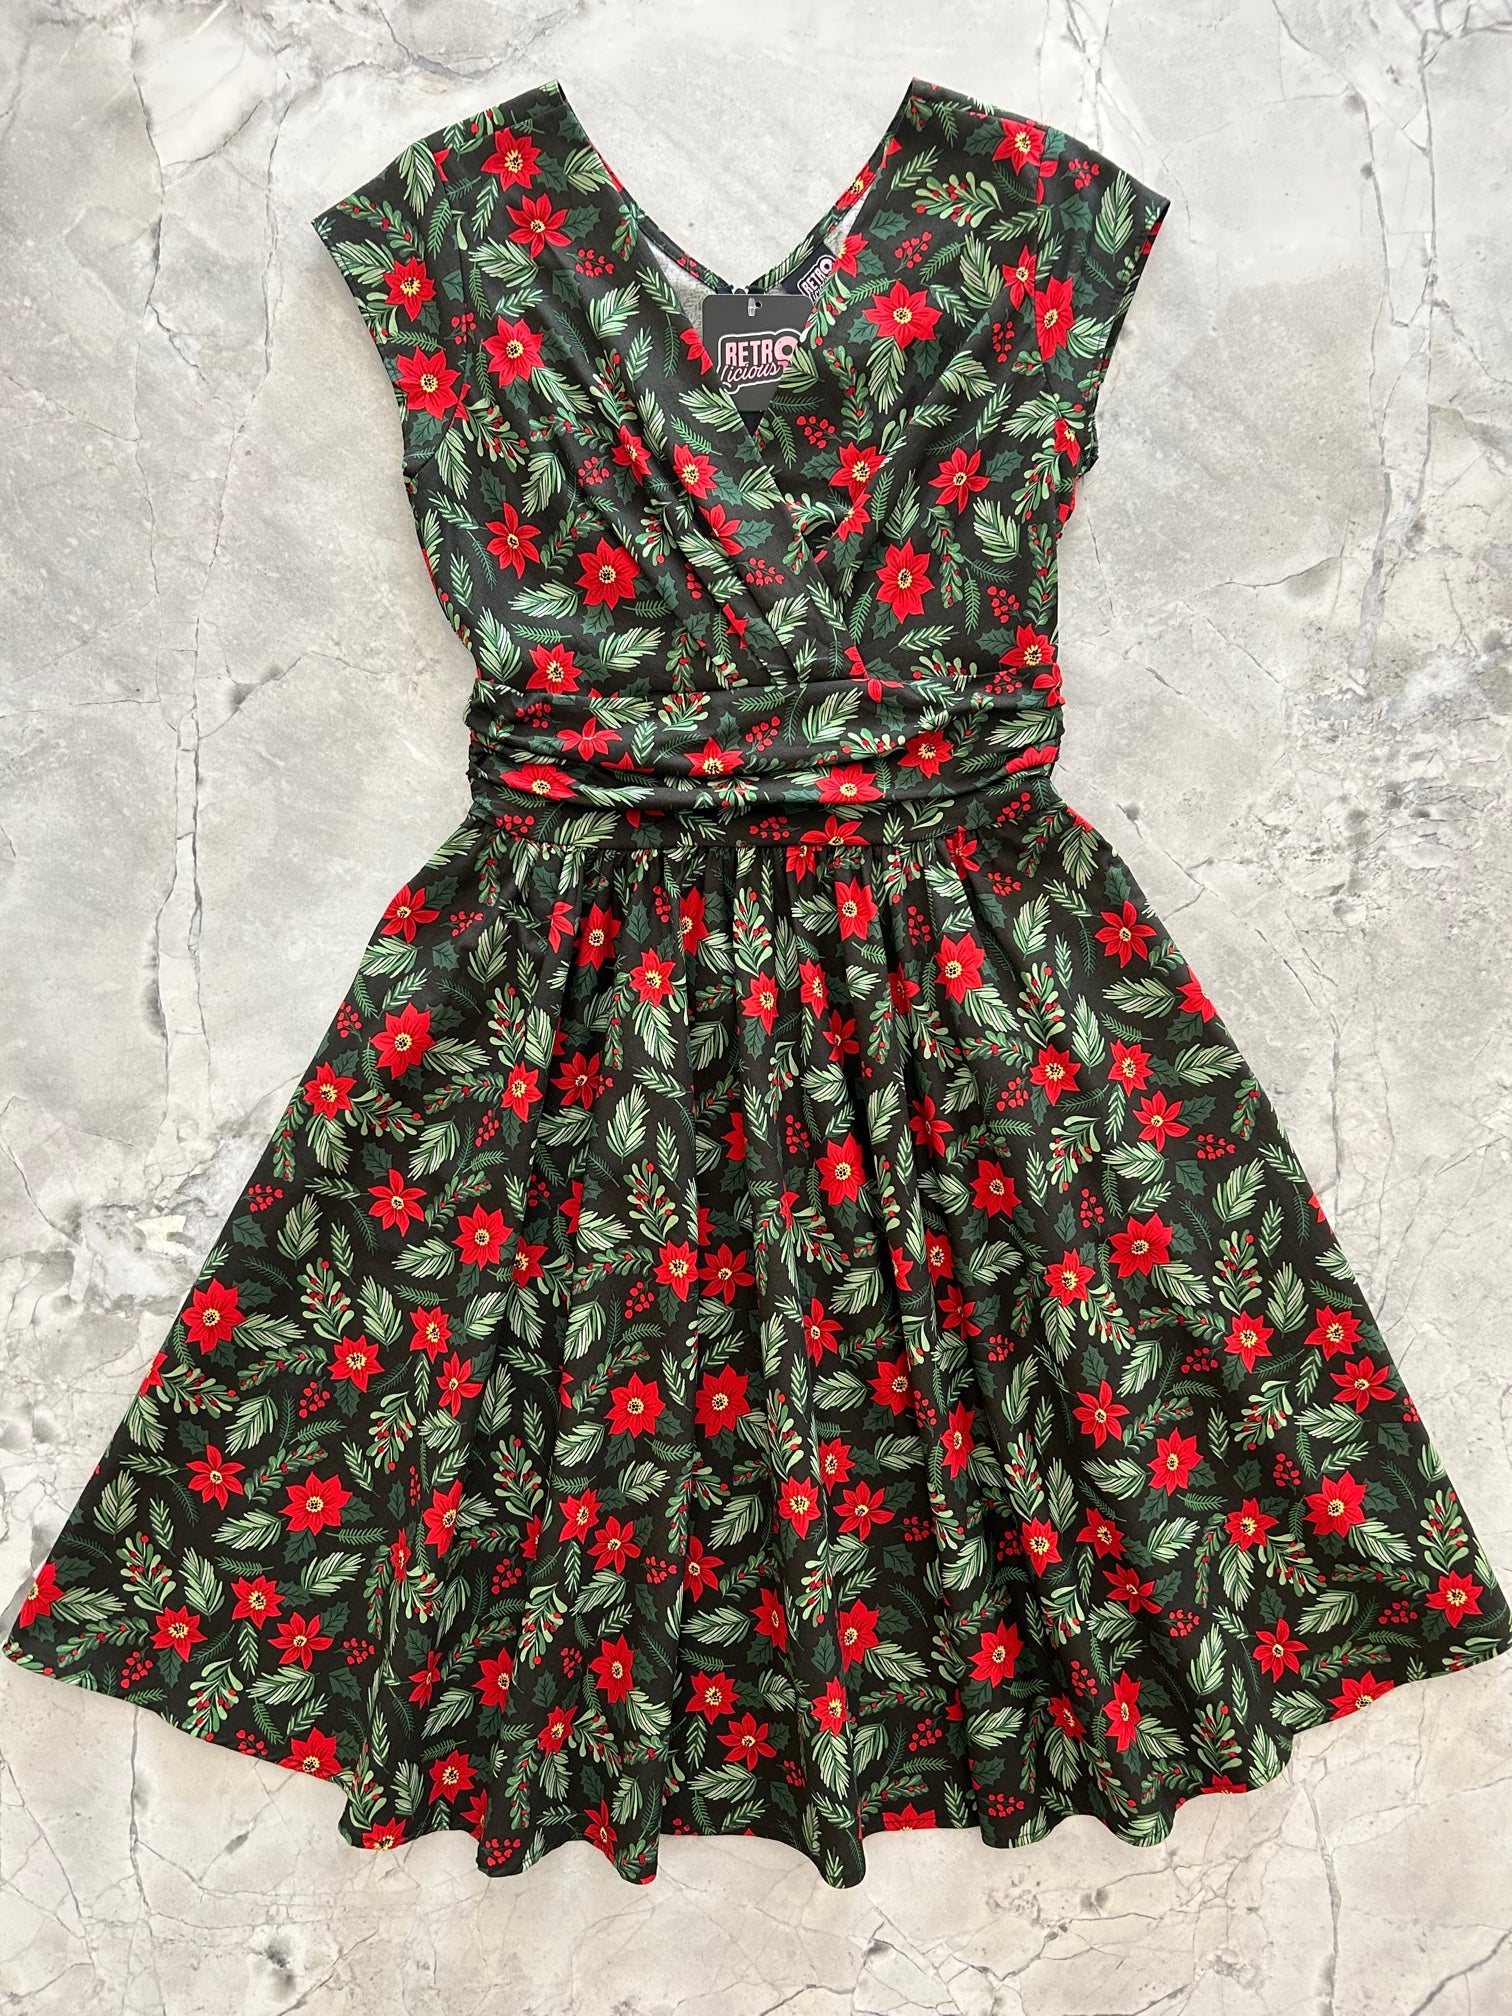 flat lay of vintage style holiday greta dress with poinsettia print